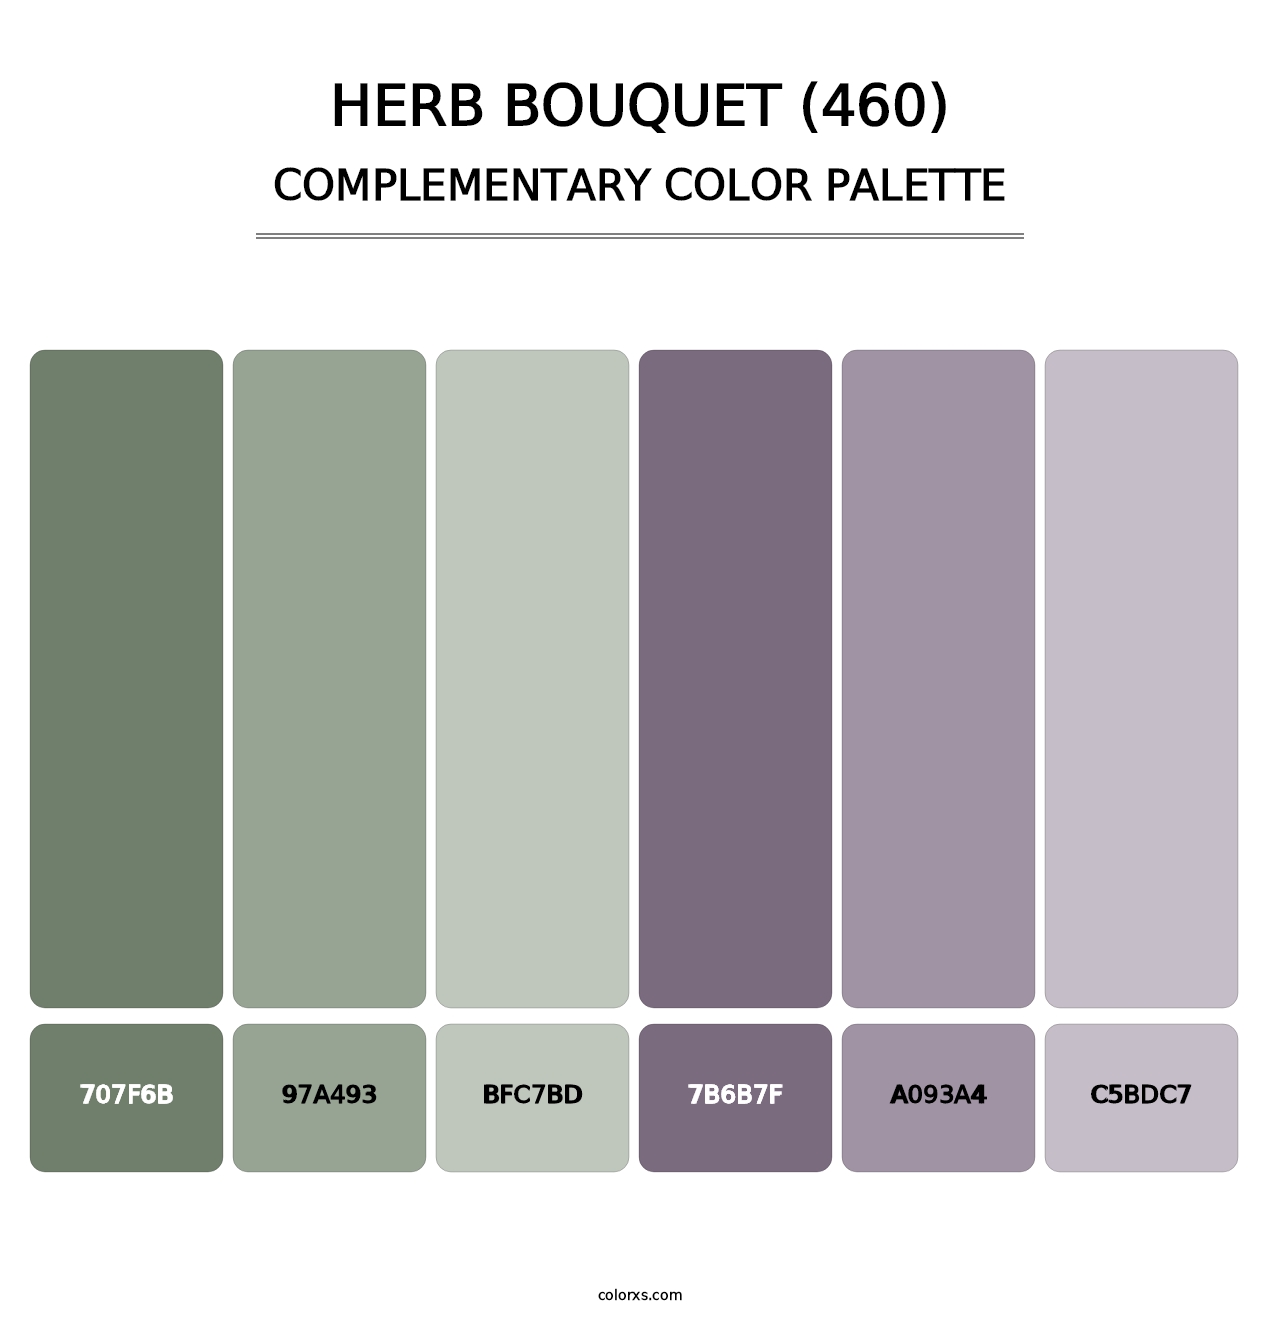 Herb Bouquet (460) - Complementary Color Palette